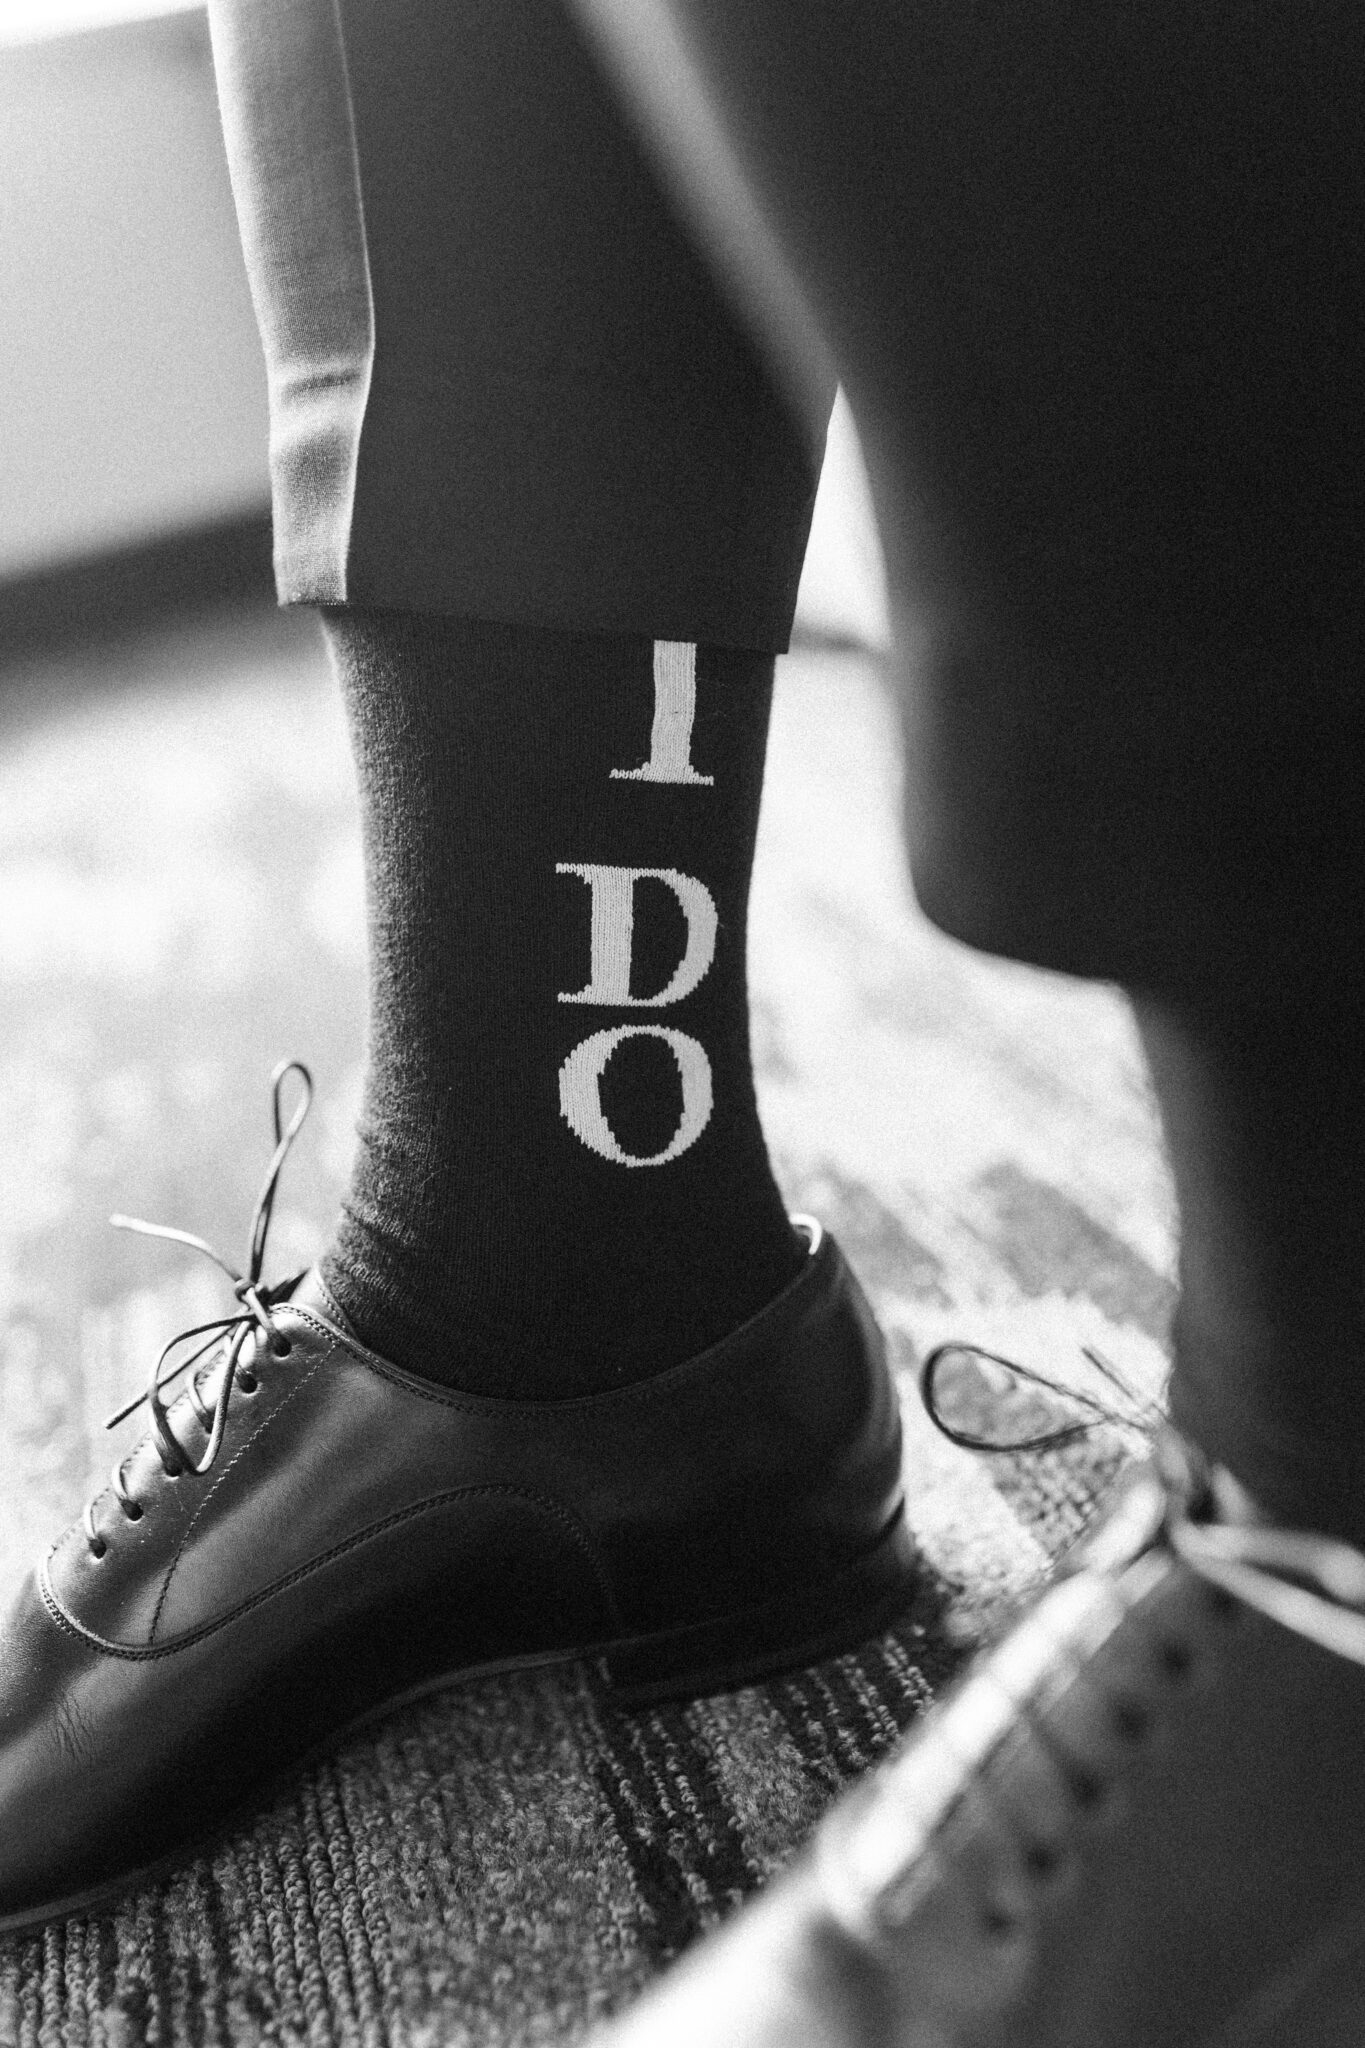 Groom getting ready on his wedding day at Sparrowlane Events featuring "I Do" socks. Elegant wedding inspiration. 